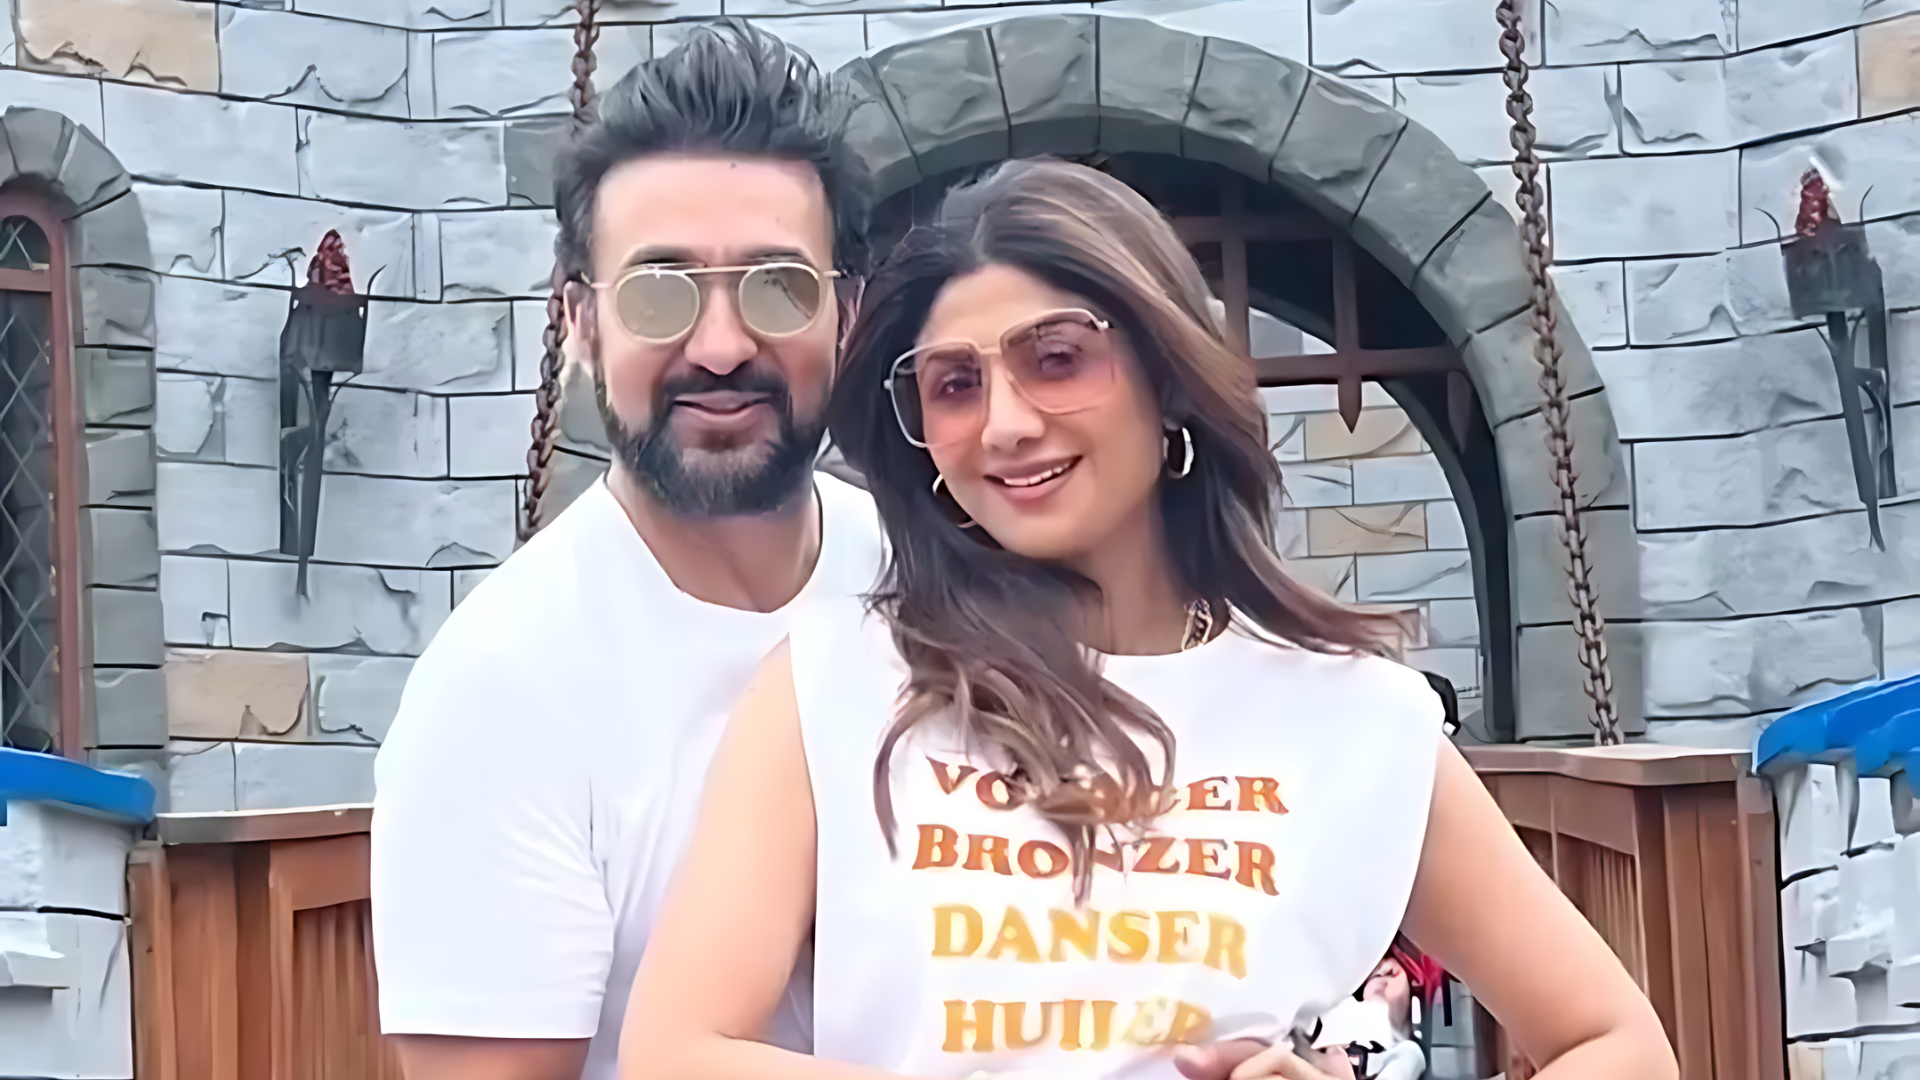 Shilpa Shetty and Raj Kundra Face fraud allegations Over Alleged Gold Scheme Scam